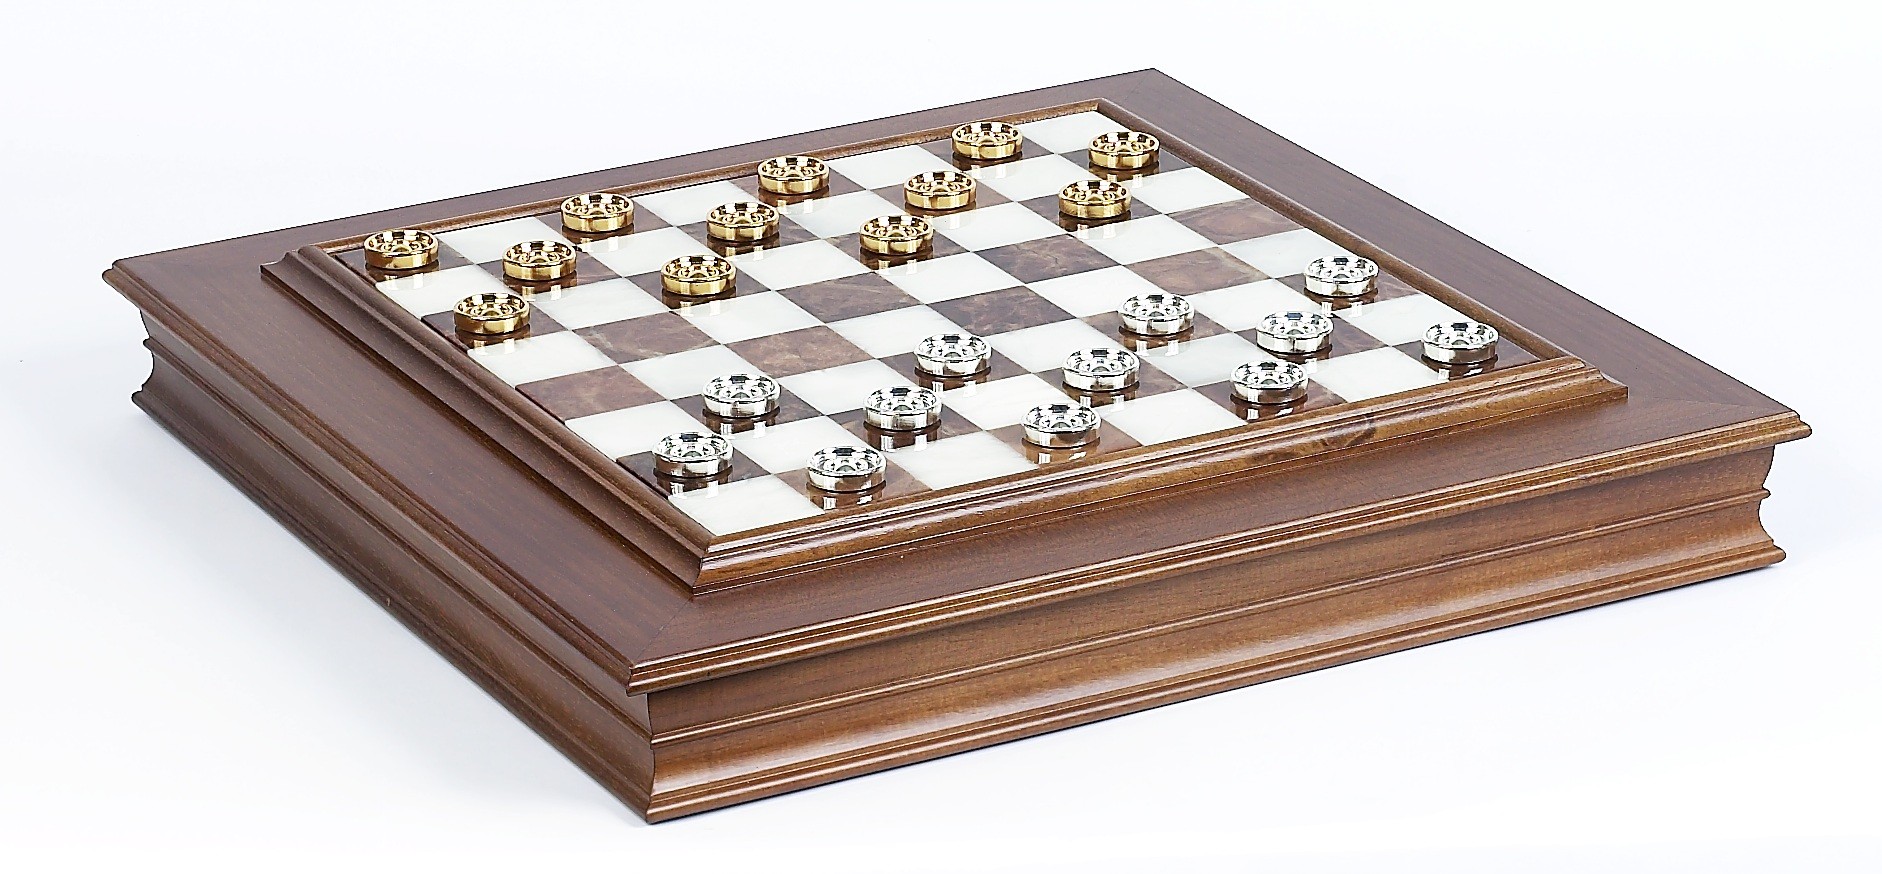 The Gold Checkers & Marble Chess Board/Cabinet